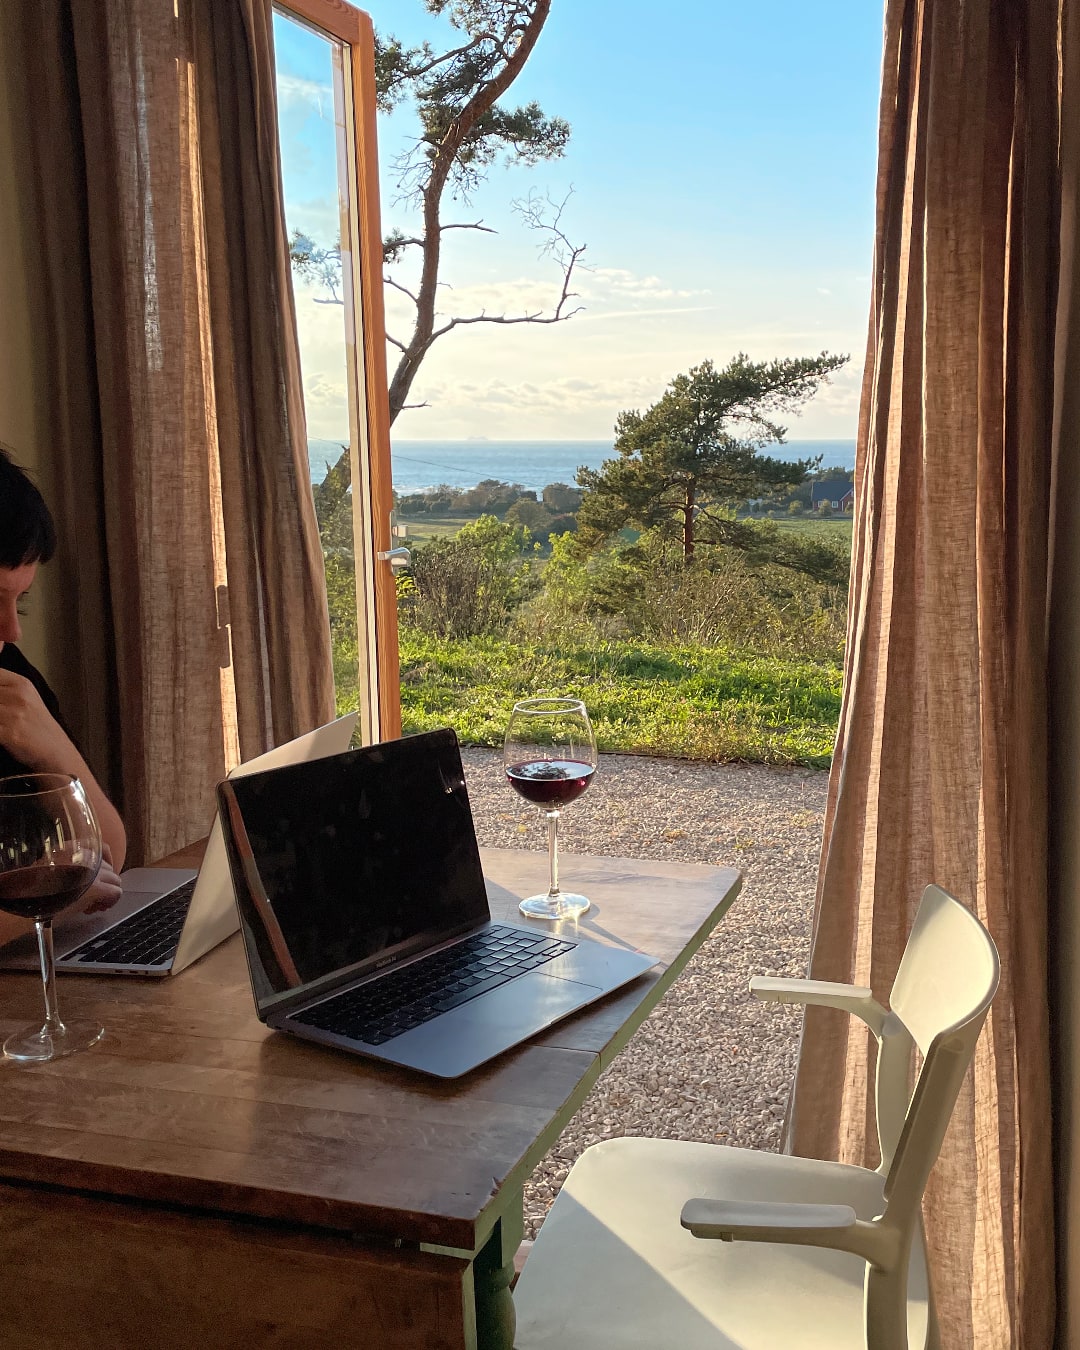 A spectacular view from an open door. A blue sky with clouds and the sea at a distance. Inside, a woman sits at a table working on a laptop accompanied by a glass of fine. Opposite her, there's another laptop, a glass of wine, and an empty chair. Maybe the photographer's seat?